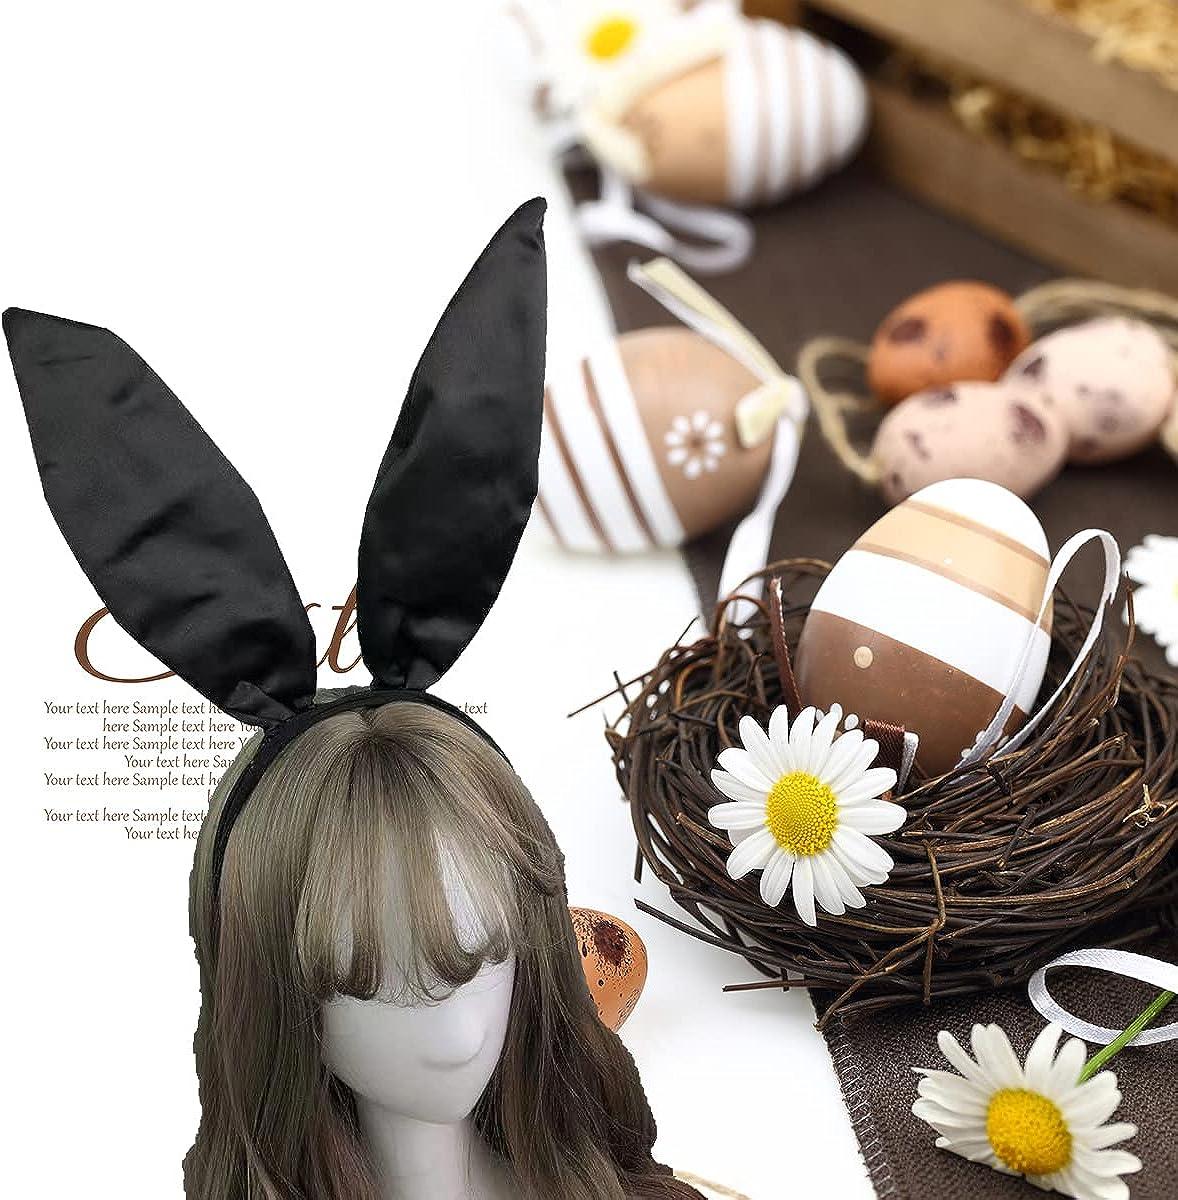 FRCOLOR Bunny Ears Headband, Easter Sweet Sexy Rabbit Ear Hair Band for  Party Cosplay Costume Accessory (Black)